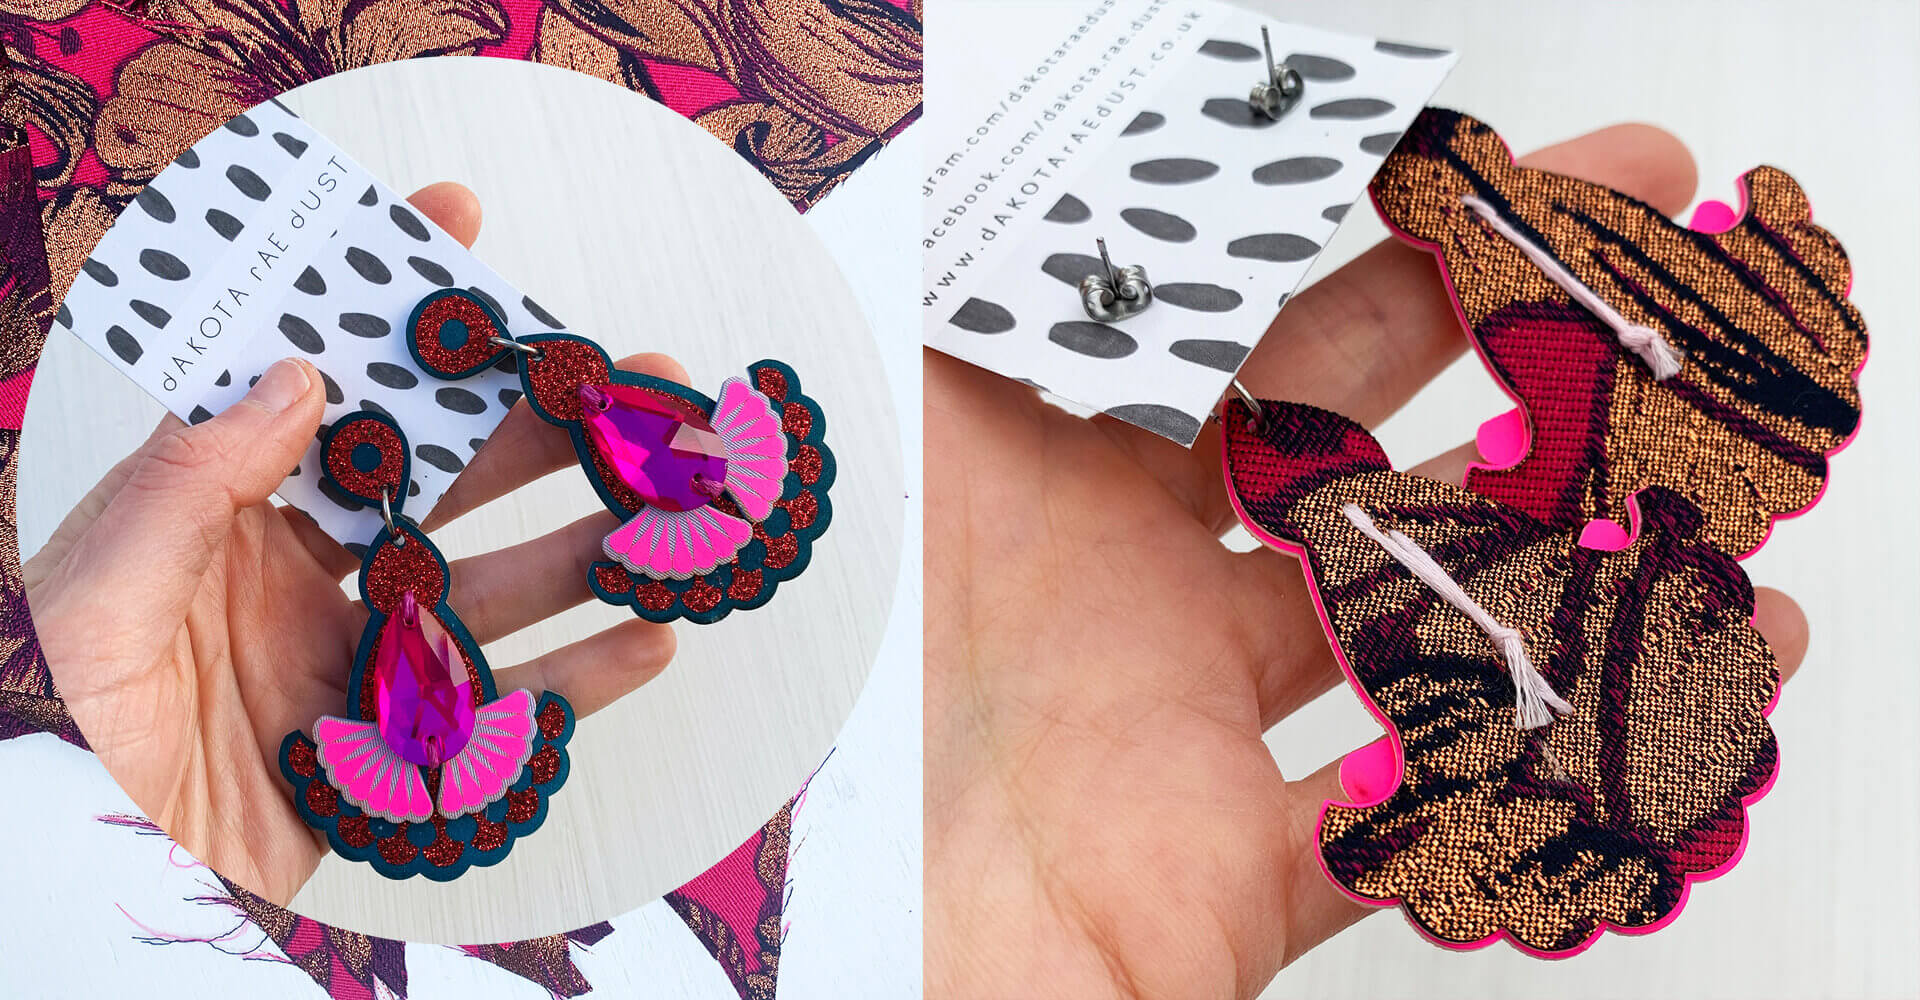 On the left a circular image of some pink jewel earrings is placed on top of a close up photograph of some deep pink and copper floral brocade fabric. On the right a pair of earrings are held in a woman's hand. The backs of the earrings are facing the camera and are covered in the same floral fabric.